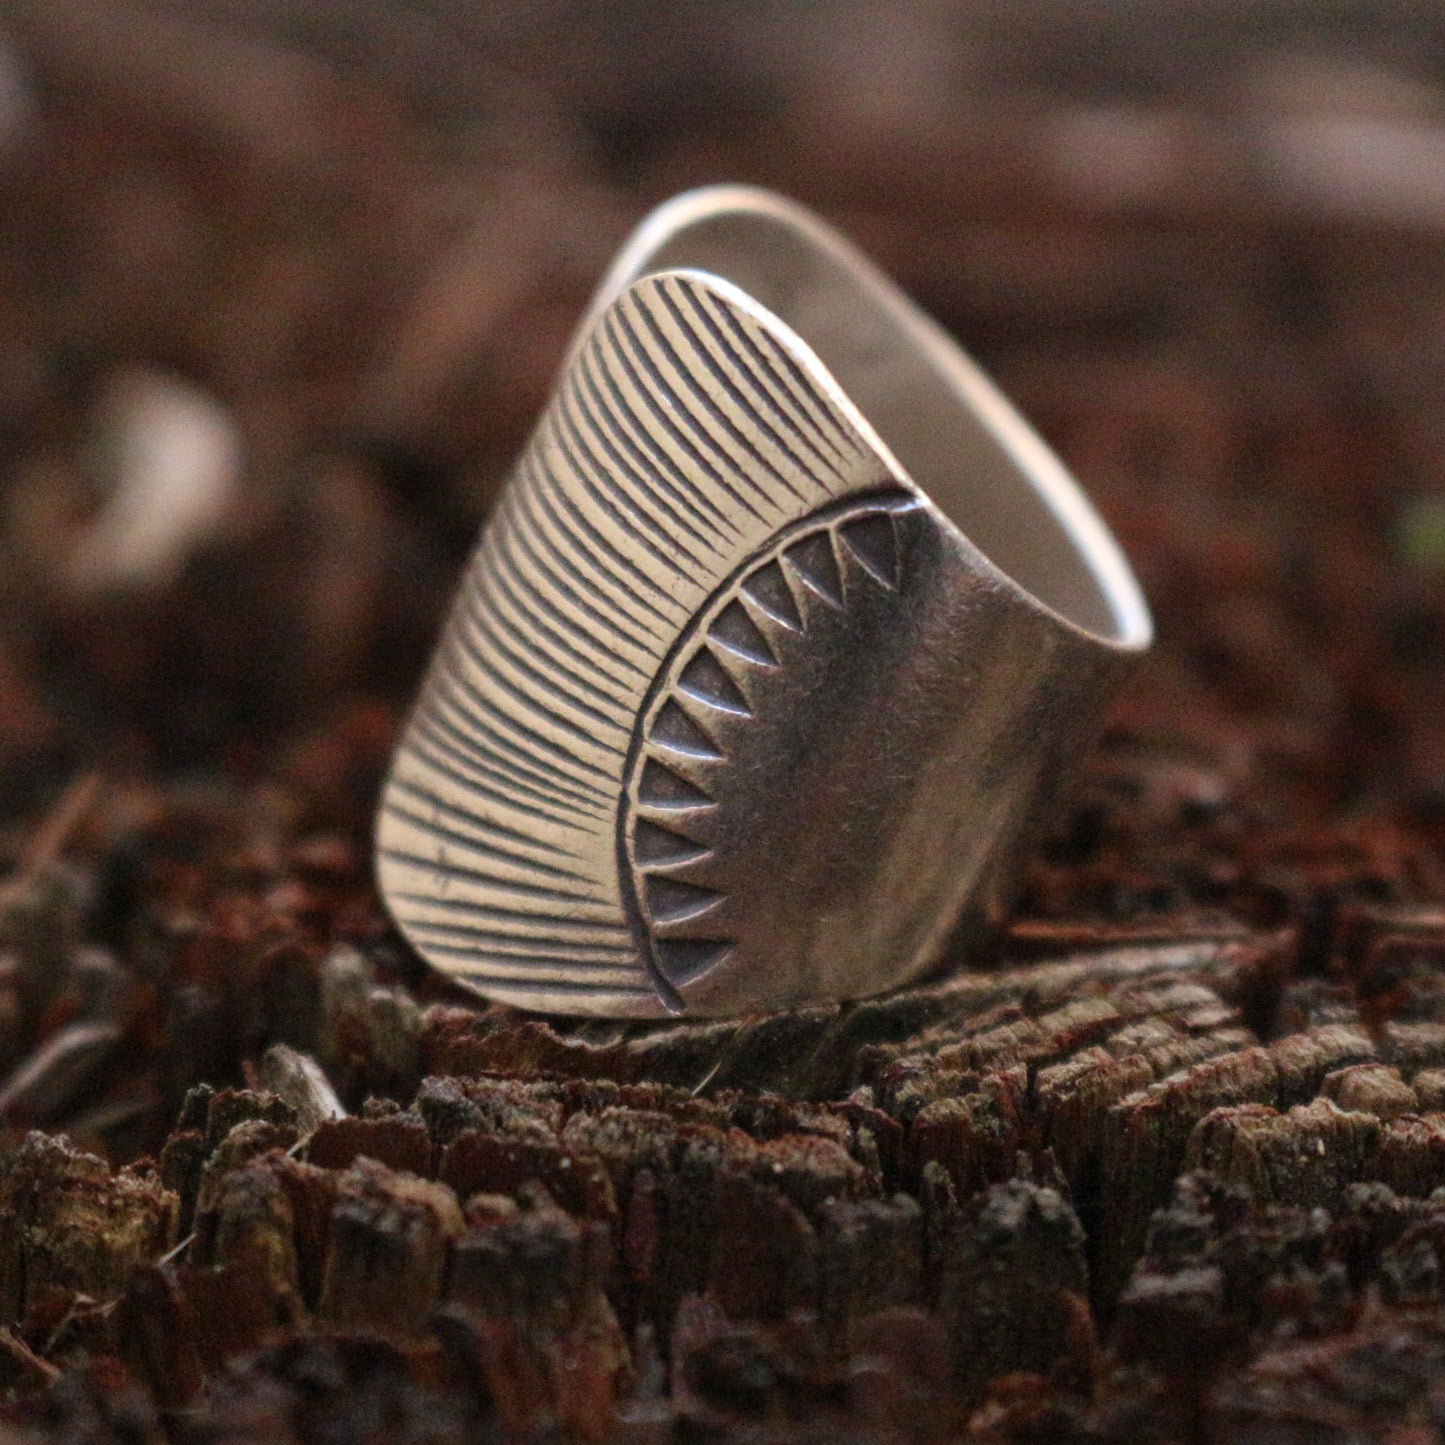 Etched Silver Ring